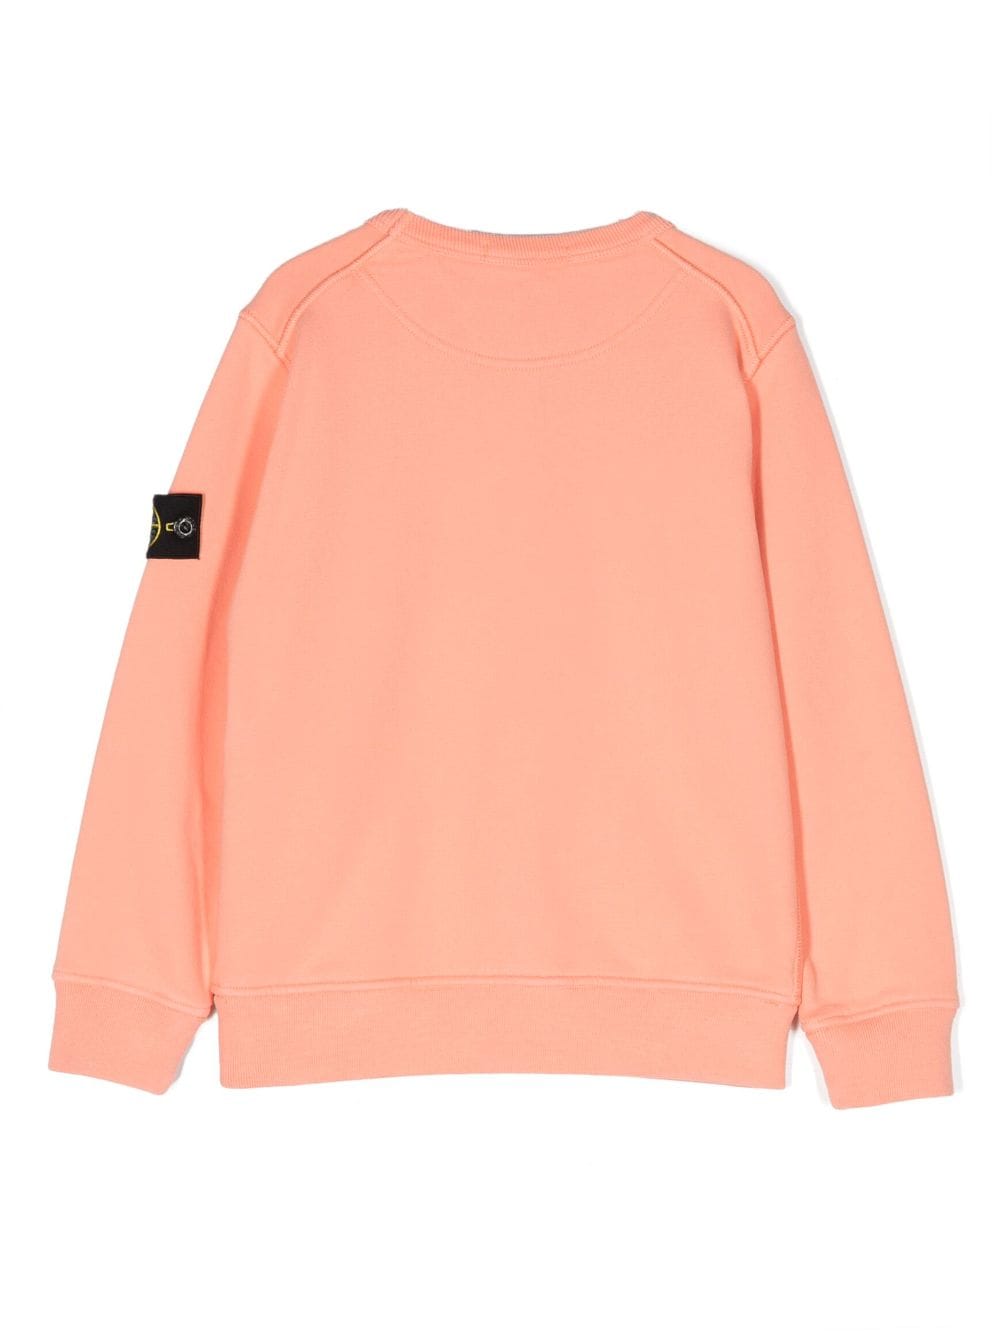 Coral sweatshirt for boys with logo